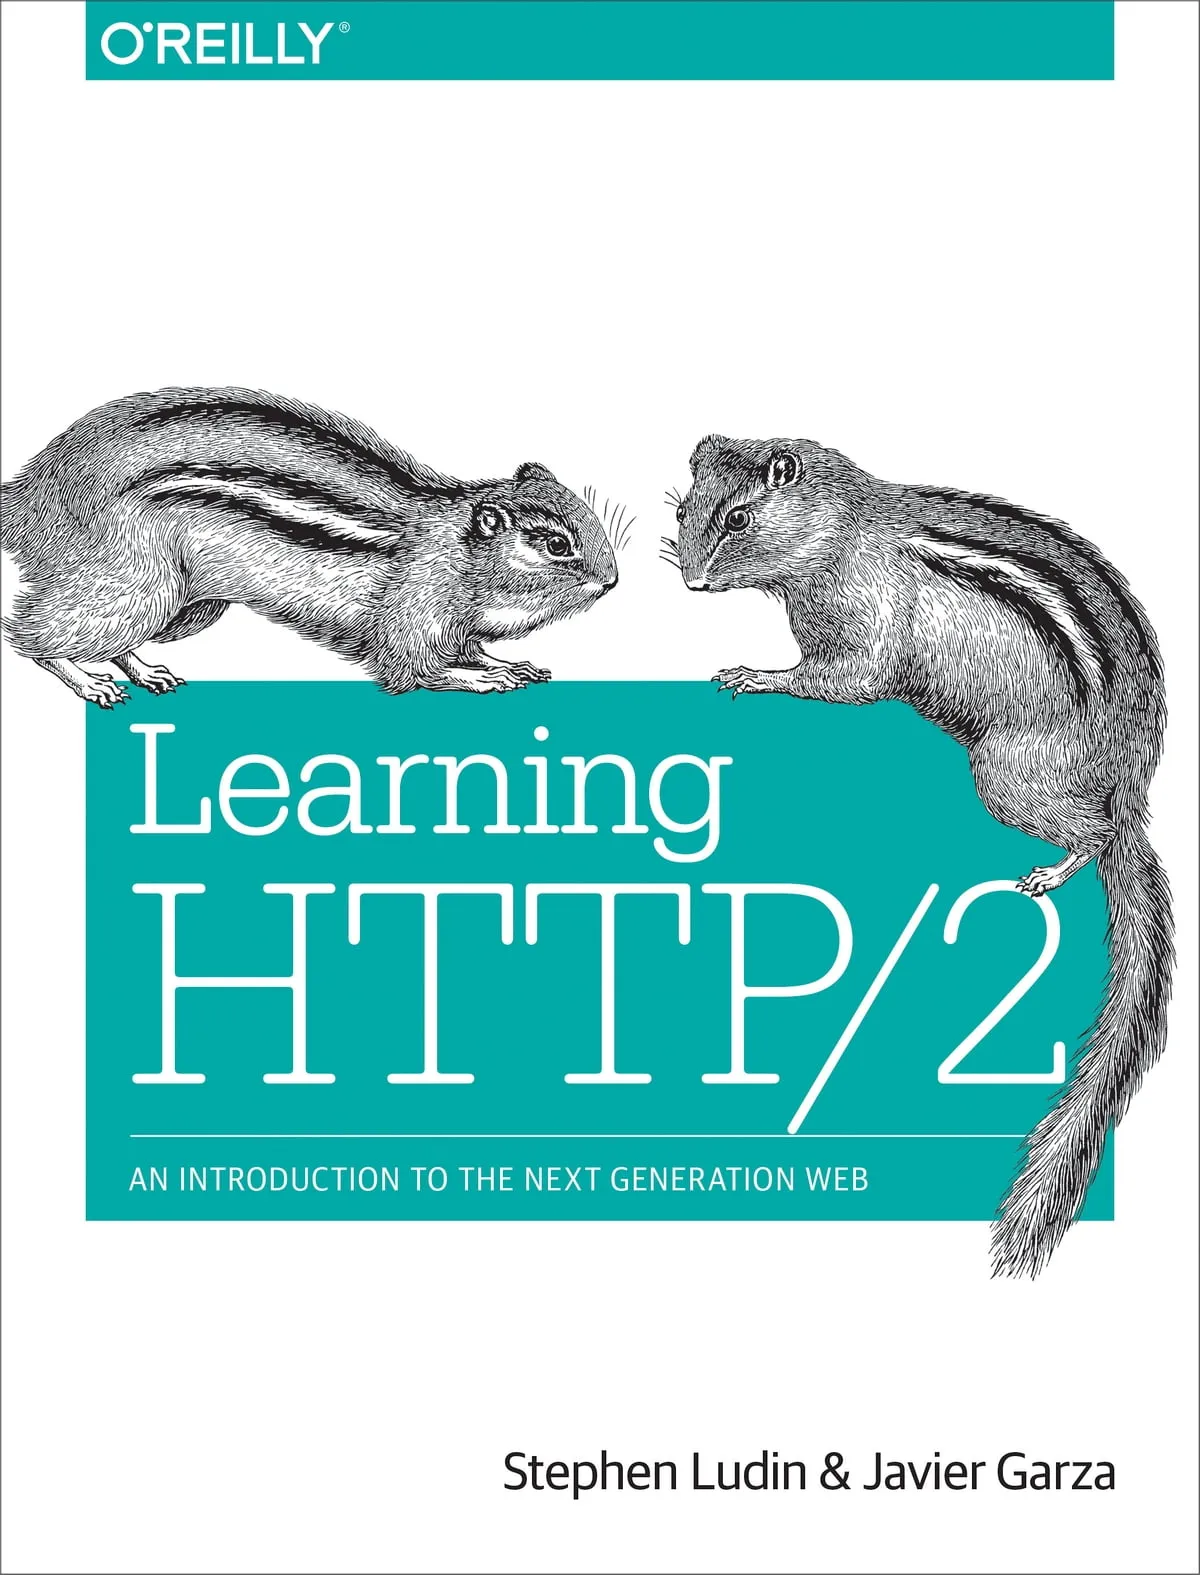 Cover of the book title Learning HTTP/2